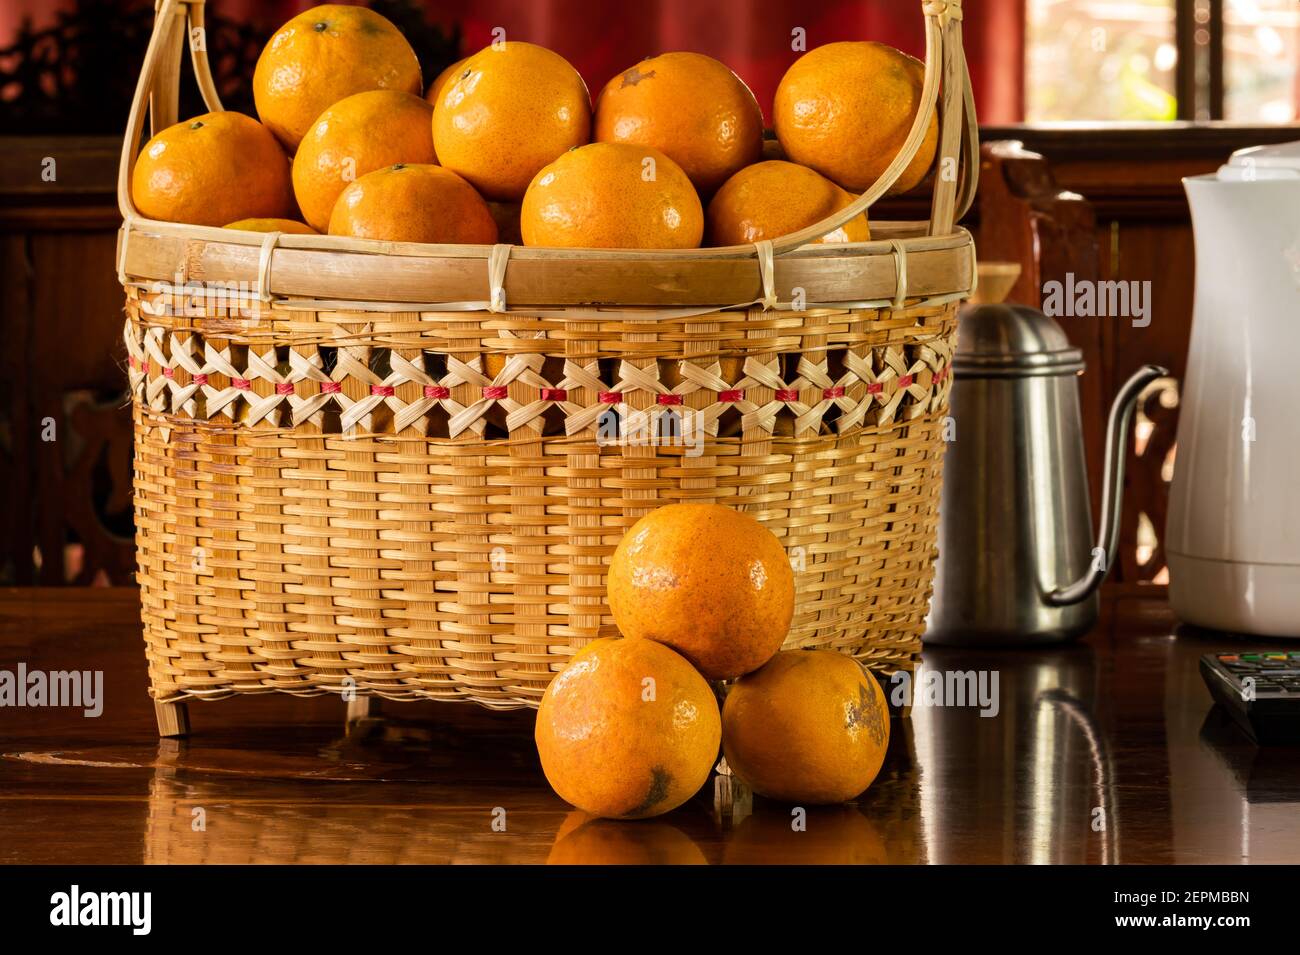 Ripe oranges in a bamboo basket on a wooden table. Stock Photo